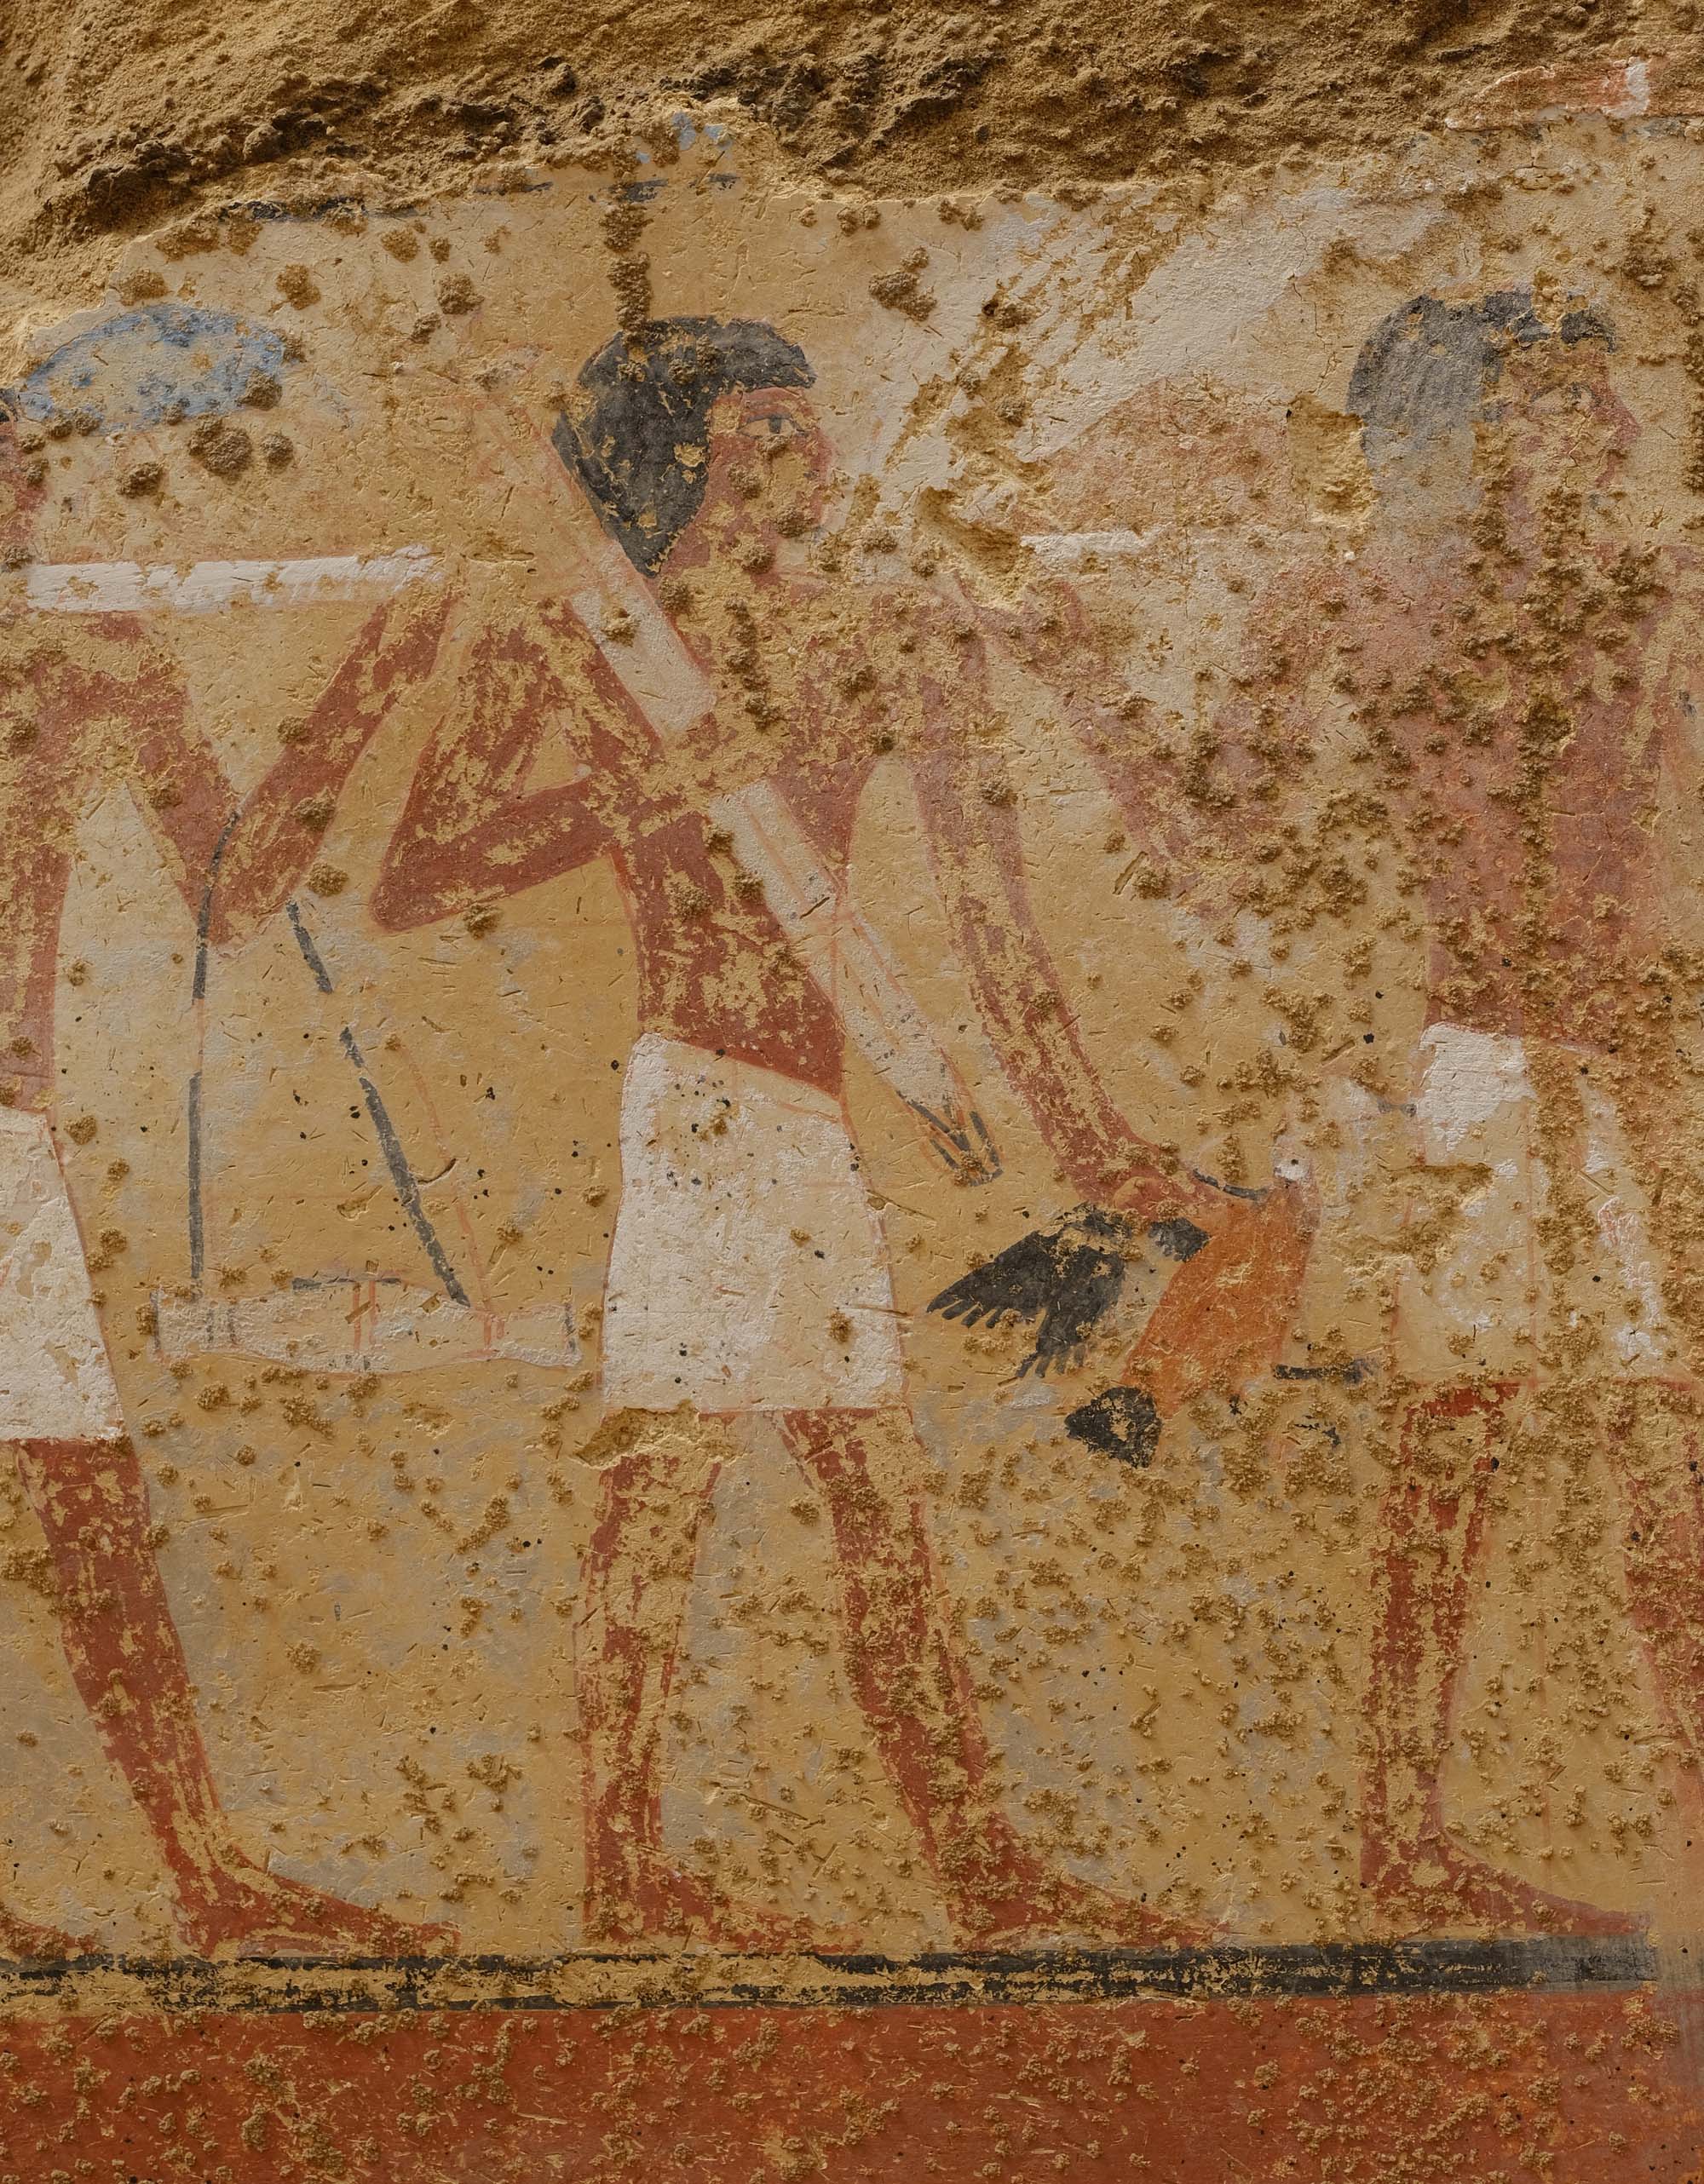 The painted decoration of the tomb of Seneb-nebef at Dahshur, Egypt